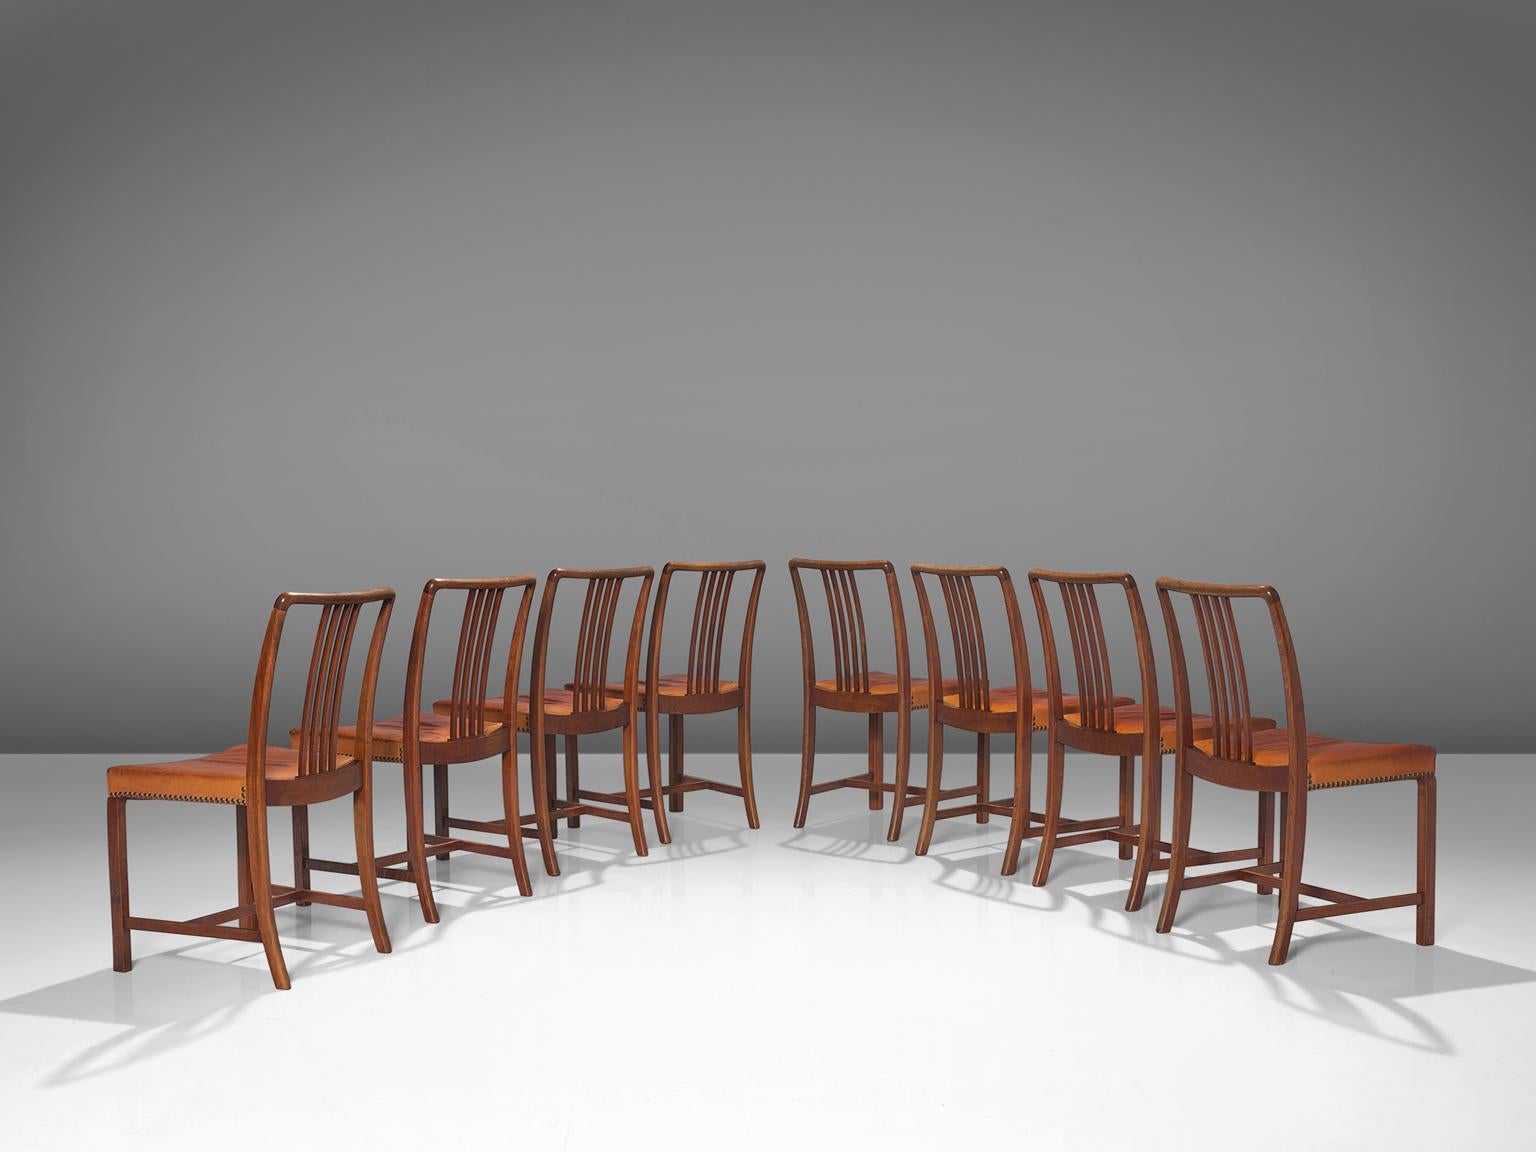 Jørgen Christensens for Jørgen Christensens, set of eight dining chairs, oak, original cognac leather, Denmark, 1942
 
Danish designer and cabinetmaker Jørgen Christensens designed this elegant set of dining chairs in 1942. The dynamic curve in the